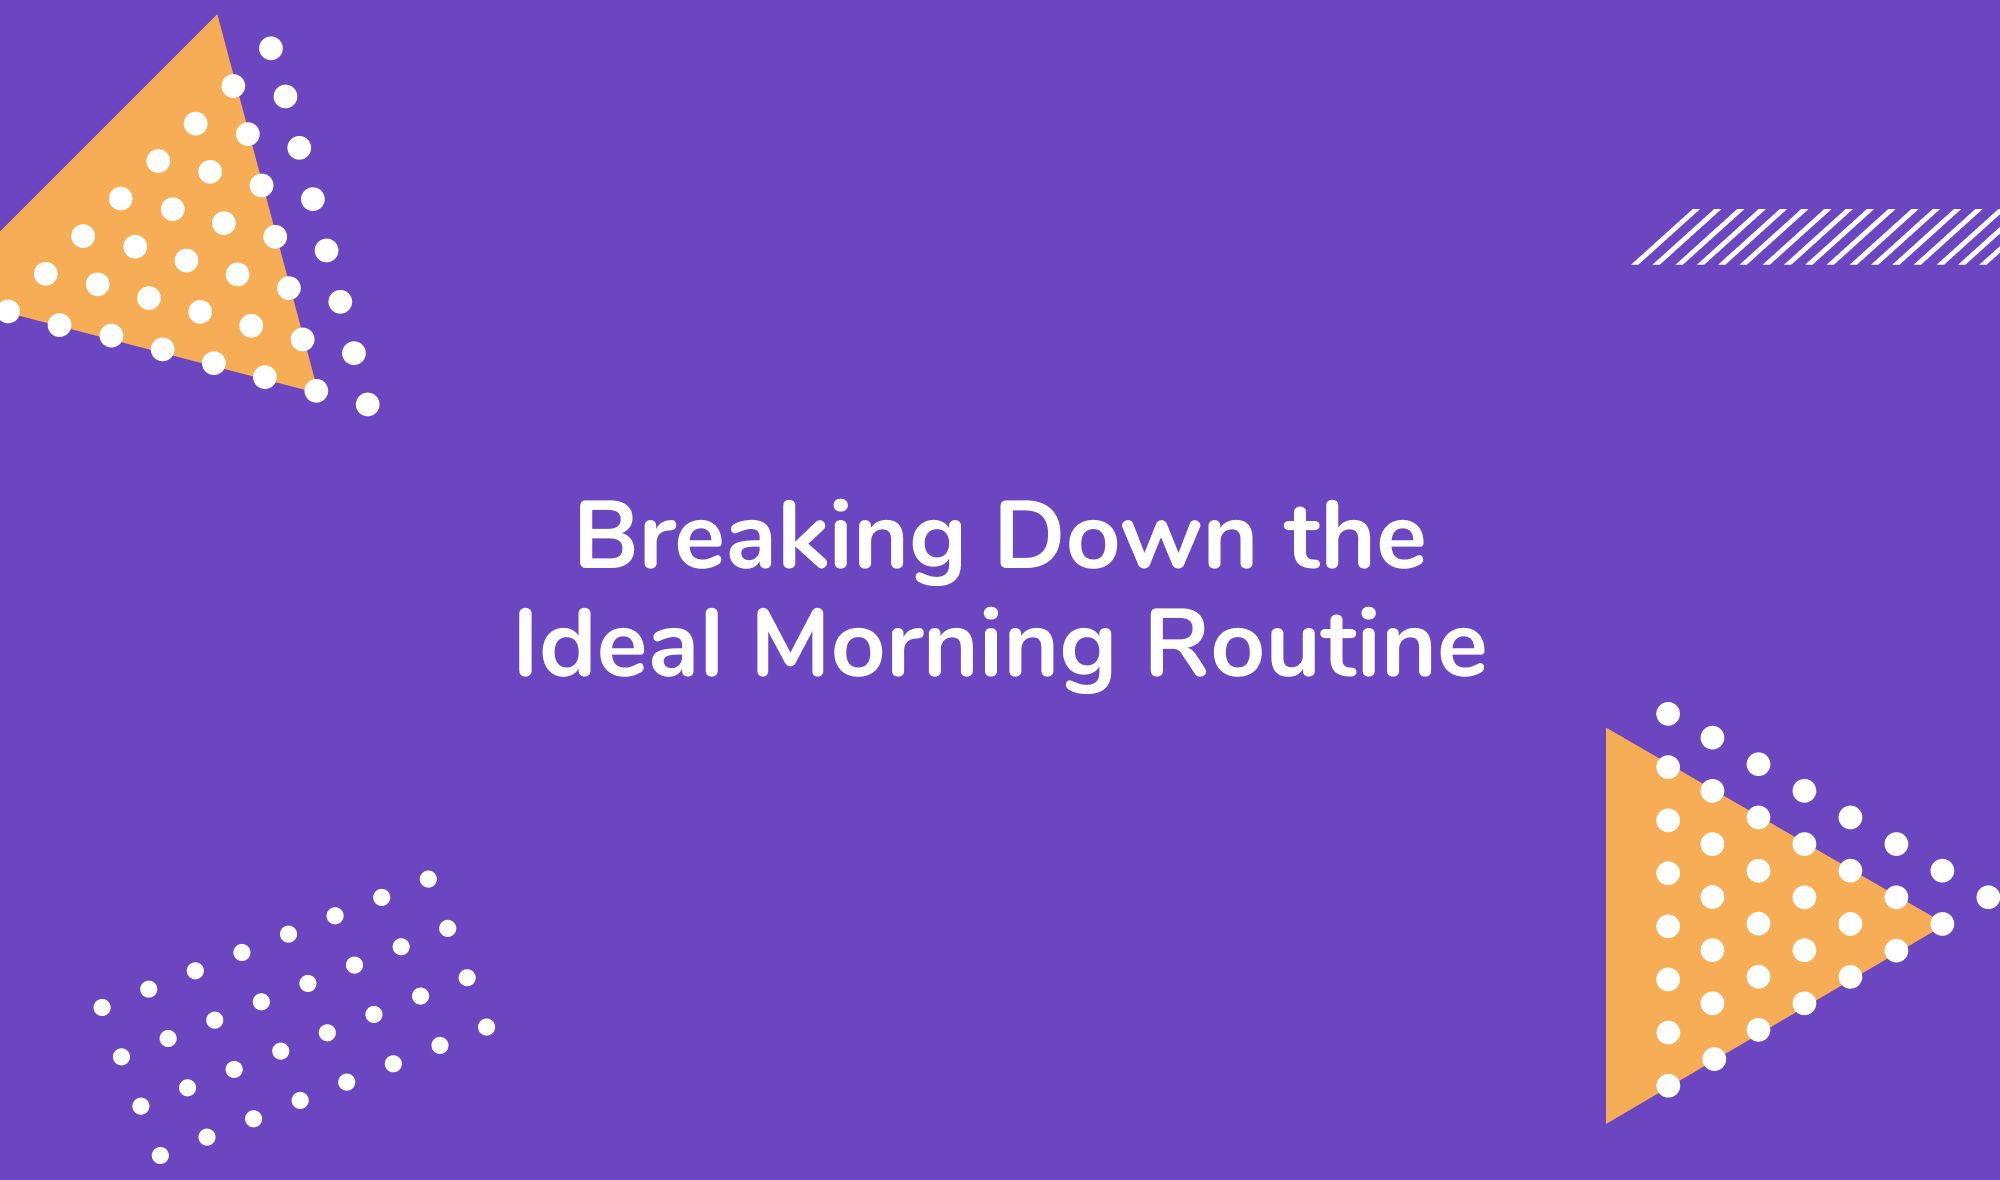 Breaking Down the Ideal Professional Development Morning Routine